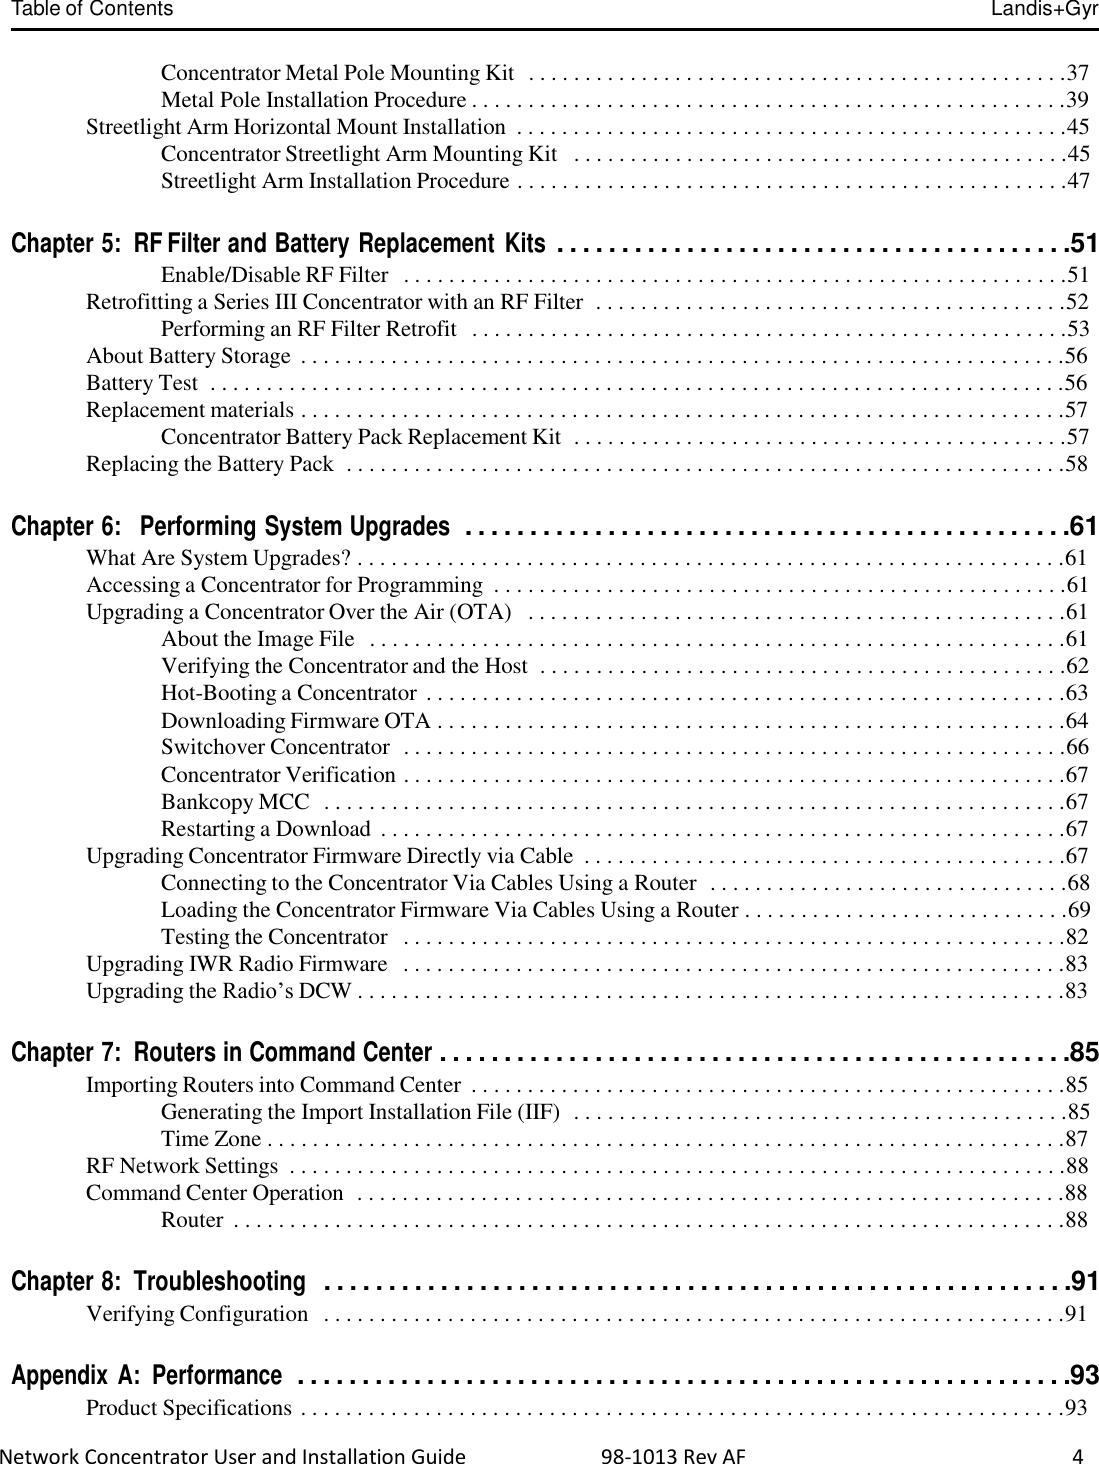 Table of Contents Landis+Gyr  Network Concentrator User and Installation Guide                          98-1013 Rev AF                     4   Concentrator Metal Pole Mounting Kit  . . . . . . . . . . . . . . . . . . . . . . . . . . . . . . . . . . . . . . . . . . . . . . . .37 Metal Pole Installation Procedure . . . . . . . . . . . . . . . . . . . . . . . . . . . . . . . . . . . . . . . . . . . . . . . . . . . . .39 Streetlight Arm Horizontal Mount Installation  . . . . . . . . . . . . . . . . . . . . . . . . . . . . . . . . . . . . . . . . . . . . . . . . .45 Concentrator Streetlight Arm Mounting Kit   . . . . . . . . . . . . . . . . . . . . . . . . . . . . . . . . . . . . . . . . . . . .45 Streetlight Arm Installation Procedure . . . . . . . . . . . . . . . . . . . . . . . . . . . . . . . . . . . . . . . . . . . . . . . . .47   Chapter 5:  RF Filter and Battery Replacement  Kits . . . . . . . . . . . . . . . . . . . . . . . . . . . . . . . . . . . . . . . .51 Enable/Disable RF Filter   . . . . . . . . . . . . . . . . . . . . . . . . . . . . . . . . . . . . . . . . . . . . . . . . . . . . . . . . . . .51 Retrofitting a Series III Concentrator with an RF Filter  . . . . . . . . . . . . . . . . . . . . . . . . . . . . . . . . . . . . . . . . . .52 Performing an RF Filter Retrofit  . . . . . . . . . . . . . . . . . . . . . . . . . . . . . . . . . . . . . . . . . . . . . . . . . . . . .53 About Battery Storage  . . . . . . . . . . . . . . . . . . . . . . . . . . . . . . . . . . . . . . . . . . . . . . . . . . . . . . . . . . . . . . . . . . . .56 Battery Test  . . . . . . . . . . . . . . . . . . . . . . . . . . . . . . . . . . . . . . . . . . . . . . . . . . . . . . . . . . . . . . . . . . . . . . . . . . . .56 Replacement materials . . . . . . . . . . . . . . . . . . . . . . . . . . . . . . . . . . . . . . . . . . . . . . . . . . . . . . . . . . . . . . . . . . . .57 Concentrator Battery Pack Replacement Kit  . . . . . . . . . . . . . . . . . . . . . . . . . . . . . . . . . . . . . . . . . . . .57 Replacing the Battery Pack  . . . . . . . . . . . . . . . . . . . . . . . . . . . . . . . . . . . . . . . . . . . . . . . . . . . . . . . . . . . . . . . .58   Chapter 6:   Performing System Upgrades  . . . . . . . . . . . . . . . . . . . . . . . . . . . . . . . . . . . . . . . . . . . . . . .61 What Are System Upgrades? . . . . . . . . . . . . . . . . . . . . . . . . . . . . . . . . . . . . . . . . . . . . . . . . . . . . . . . . . . . . . . .61 Accessing a Concentrator for Programming  . . . . . . . . . . . . . . . . . . . . . . . . . . . . . . . . . . . . . . . . . . . . . . . . . . .61 Upgrading a Concentrator Over the Air (OTA)   . . . . . . . . . . . . . . . . . . . . . . . . . . . . . . . . . . . . . . . . . . . . . . . .61 About the Image File  . . . . . . . . . . . . . . . . . . . . . . . . . . . . . . . . . . . . . . . . . . . . . . . . . . . . . . . . . . . . . .61 Verifying the Concentrator and the Host  . . . . . . . . . . . . . . . . . . . . . . . . . . . . . . . . . . . . . . . . . . . . . . .62 Hot-Booting a Concentrator . . . . . . . . . . . . . . . . . . . . . . . . . . . . . . . . . . . . . . . . . . . . . . . . . . . . . . . . .63 Downloading Firmware OTA . . . . . . . . . . . . . . . . . . . . . . . . . . . . . . . . . . . . . . . . . . . . . . . . . . . . . . . .64 Switchover Concentrator  . . . . . . . . . . . . . . . . . . . . . . . . . . . . . . . . . . . . . . . . . . . . . . . . . . . . . . . . . . .66 Concentrator Verification . . . . . . . . . . . . . . . . . . . . . . . . . . . . . . . . . . . . . . . . . . . . . . . . . . . . . . . . . . .67 Bankcopy MCC  . . . . . . . . . . . . . . . . . . . . . . . . . . . . . . . . . . . . . . . . . . . . . . . . . . . . . . . . . . . . . . . . . .67 Restarting a Download  . . . . . . . . . . . . . . . . . . . . . . . . . . . . . . . . . . . . . . . . . . . . . . . . . . . . . . . . . . . . .67 Upgrading Concentrator Firmware Directly via Cable  . . . . . . . . . . . . . . . . . . . . . . . . . . . . . . . . . . . . . . . . . . .67 Connecting to the Concentrator Via Cables Using a Router  . . . . . . . . . . . . . . . . . . . . . . . . . . . . . . . .68 Loading the Concentrator Firmware Via Cables Using a Router . . . . . . . . . . . . . . . . . . . . . . . . . . . . .69 Testing the Concentrator   . . . . . . . . . . . . . . . . . . . . . . . . . . . . . . . . . . . . . . . . . . . . . . . . . . . . . . . . . . .82 Upgrading IWR Radio Firmware   . . . . . . . . . . . . . . . . . . . . . . . . . . . . . . . . . . . . . . . . . . . . . . . . . . . . . . . . . . .83 Upgrading the Radio’s DCW . . . . . . . . . . . . . . . . . . . . . . . . . . . . . . . . . . . . . . . . . . . . . . . . . . . . . . . . . . . . . . .83   Chapter 7:  Routers in Command Center . . . . . . . . . . . . . . . . . . . . . . . . . . . . . . . . . . . . . . . . . . . . . . . . .85 Importing Routers into Command Center  . . . . . . . . . . . . . . . . . . . . . . . . . . . . . . . . . . . . . . . . . . . . . . . . . . . . .85 Generating the Import Installation File (IIF)  . . . . . . . . . . . . . . . . . . . . . . . . . . . . . . . . . . . . . . . . . . . .85 Time Zone . . . . . . . . . . . . . . . . . . . . . . . . . . . . . . . . . . . . . . . . . . . . . . . . . . . . . . . . . . . . . . . . . . . . . . .87 RF Network Settings  . . . . . . . . . . . . . . . . . . . . . . . . . . . . . . . . . . . . . . . . . . . . . . . . . . . . . . . . . . . . . . . . . . . . .88 Command Center Operation  . . . . . . . . . . . . . . . . . . . . . . . . . . . . . . . . . . . . . . . . . . . . . . . . . . . . . . . . . . . . . . .88 Router  . . . . . . . . . . . . . . . . . . . . . . . . . . . . . . . . . . . . . . . . . . . . . . . . . . . . . . . . . . . . . . . . . . . . . . . . . .88   Chapter 8:  Troubleshooting  . . . . . . . . . . . . . . . . . . . . . . . . . . . . . . . . . . . . . . . . . . . . . . . . . . . . . . . . . .91 Verifying Configuration   . . . . . . . . . . . . . . . . . . . . . . . . . . . . . . . . . . . . . . . . . . . . . . . . . . . . . . . . . . . . . . . . . .91   Appendix A:  Performance  . . . . . . . . . . . . . . . . . . . . . . . . . . . . . . . . . . . . . . . . . . . . . . . . . . . . . . . . . . . .93 Product Specifications . . . . . . . . . . . . . . . . . . . . . . . . . . . . . . . . . . . . . . . . . . . . . . . . . . . . . . . . . . . . . . . . . . . .93 